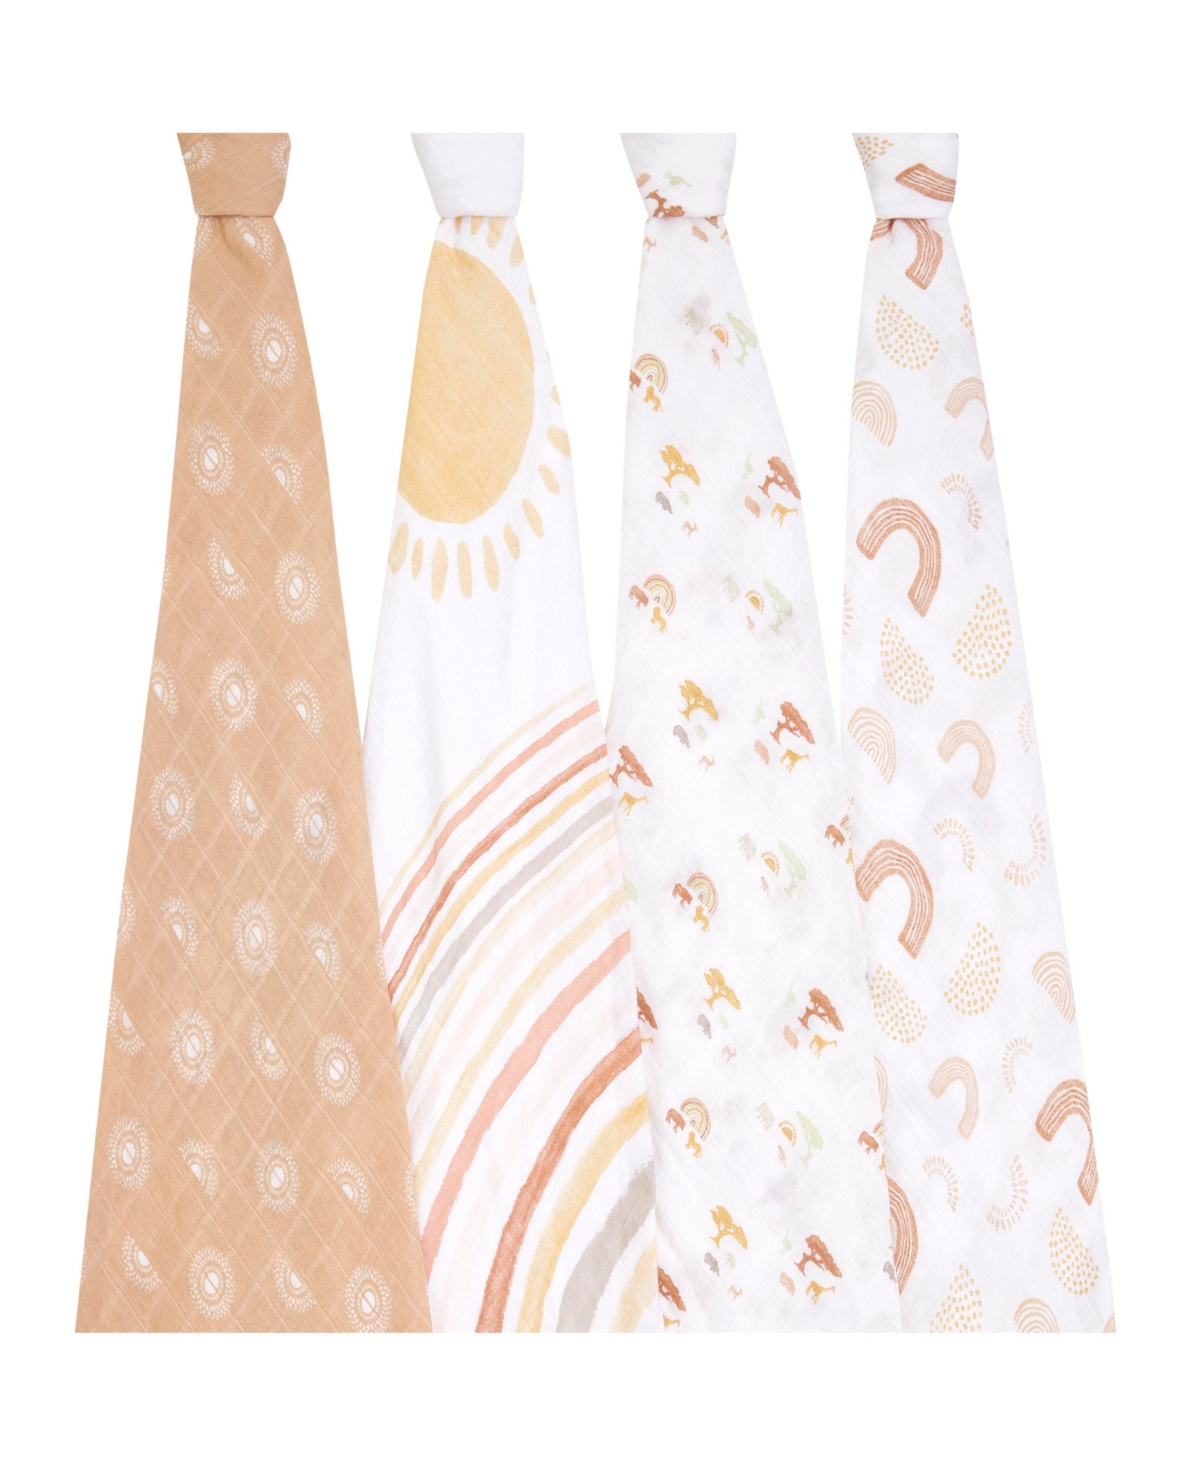 Aden By Aden + Anais Baby Girls Keep Rising Swaddle Blankets, Pack Of 4 In Multi